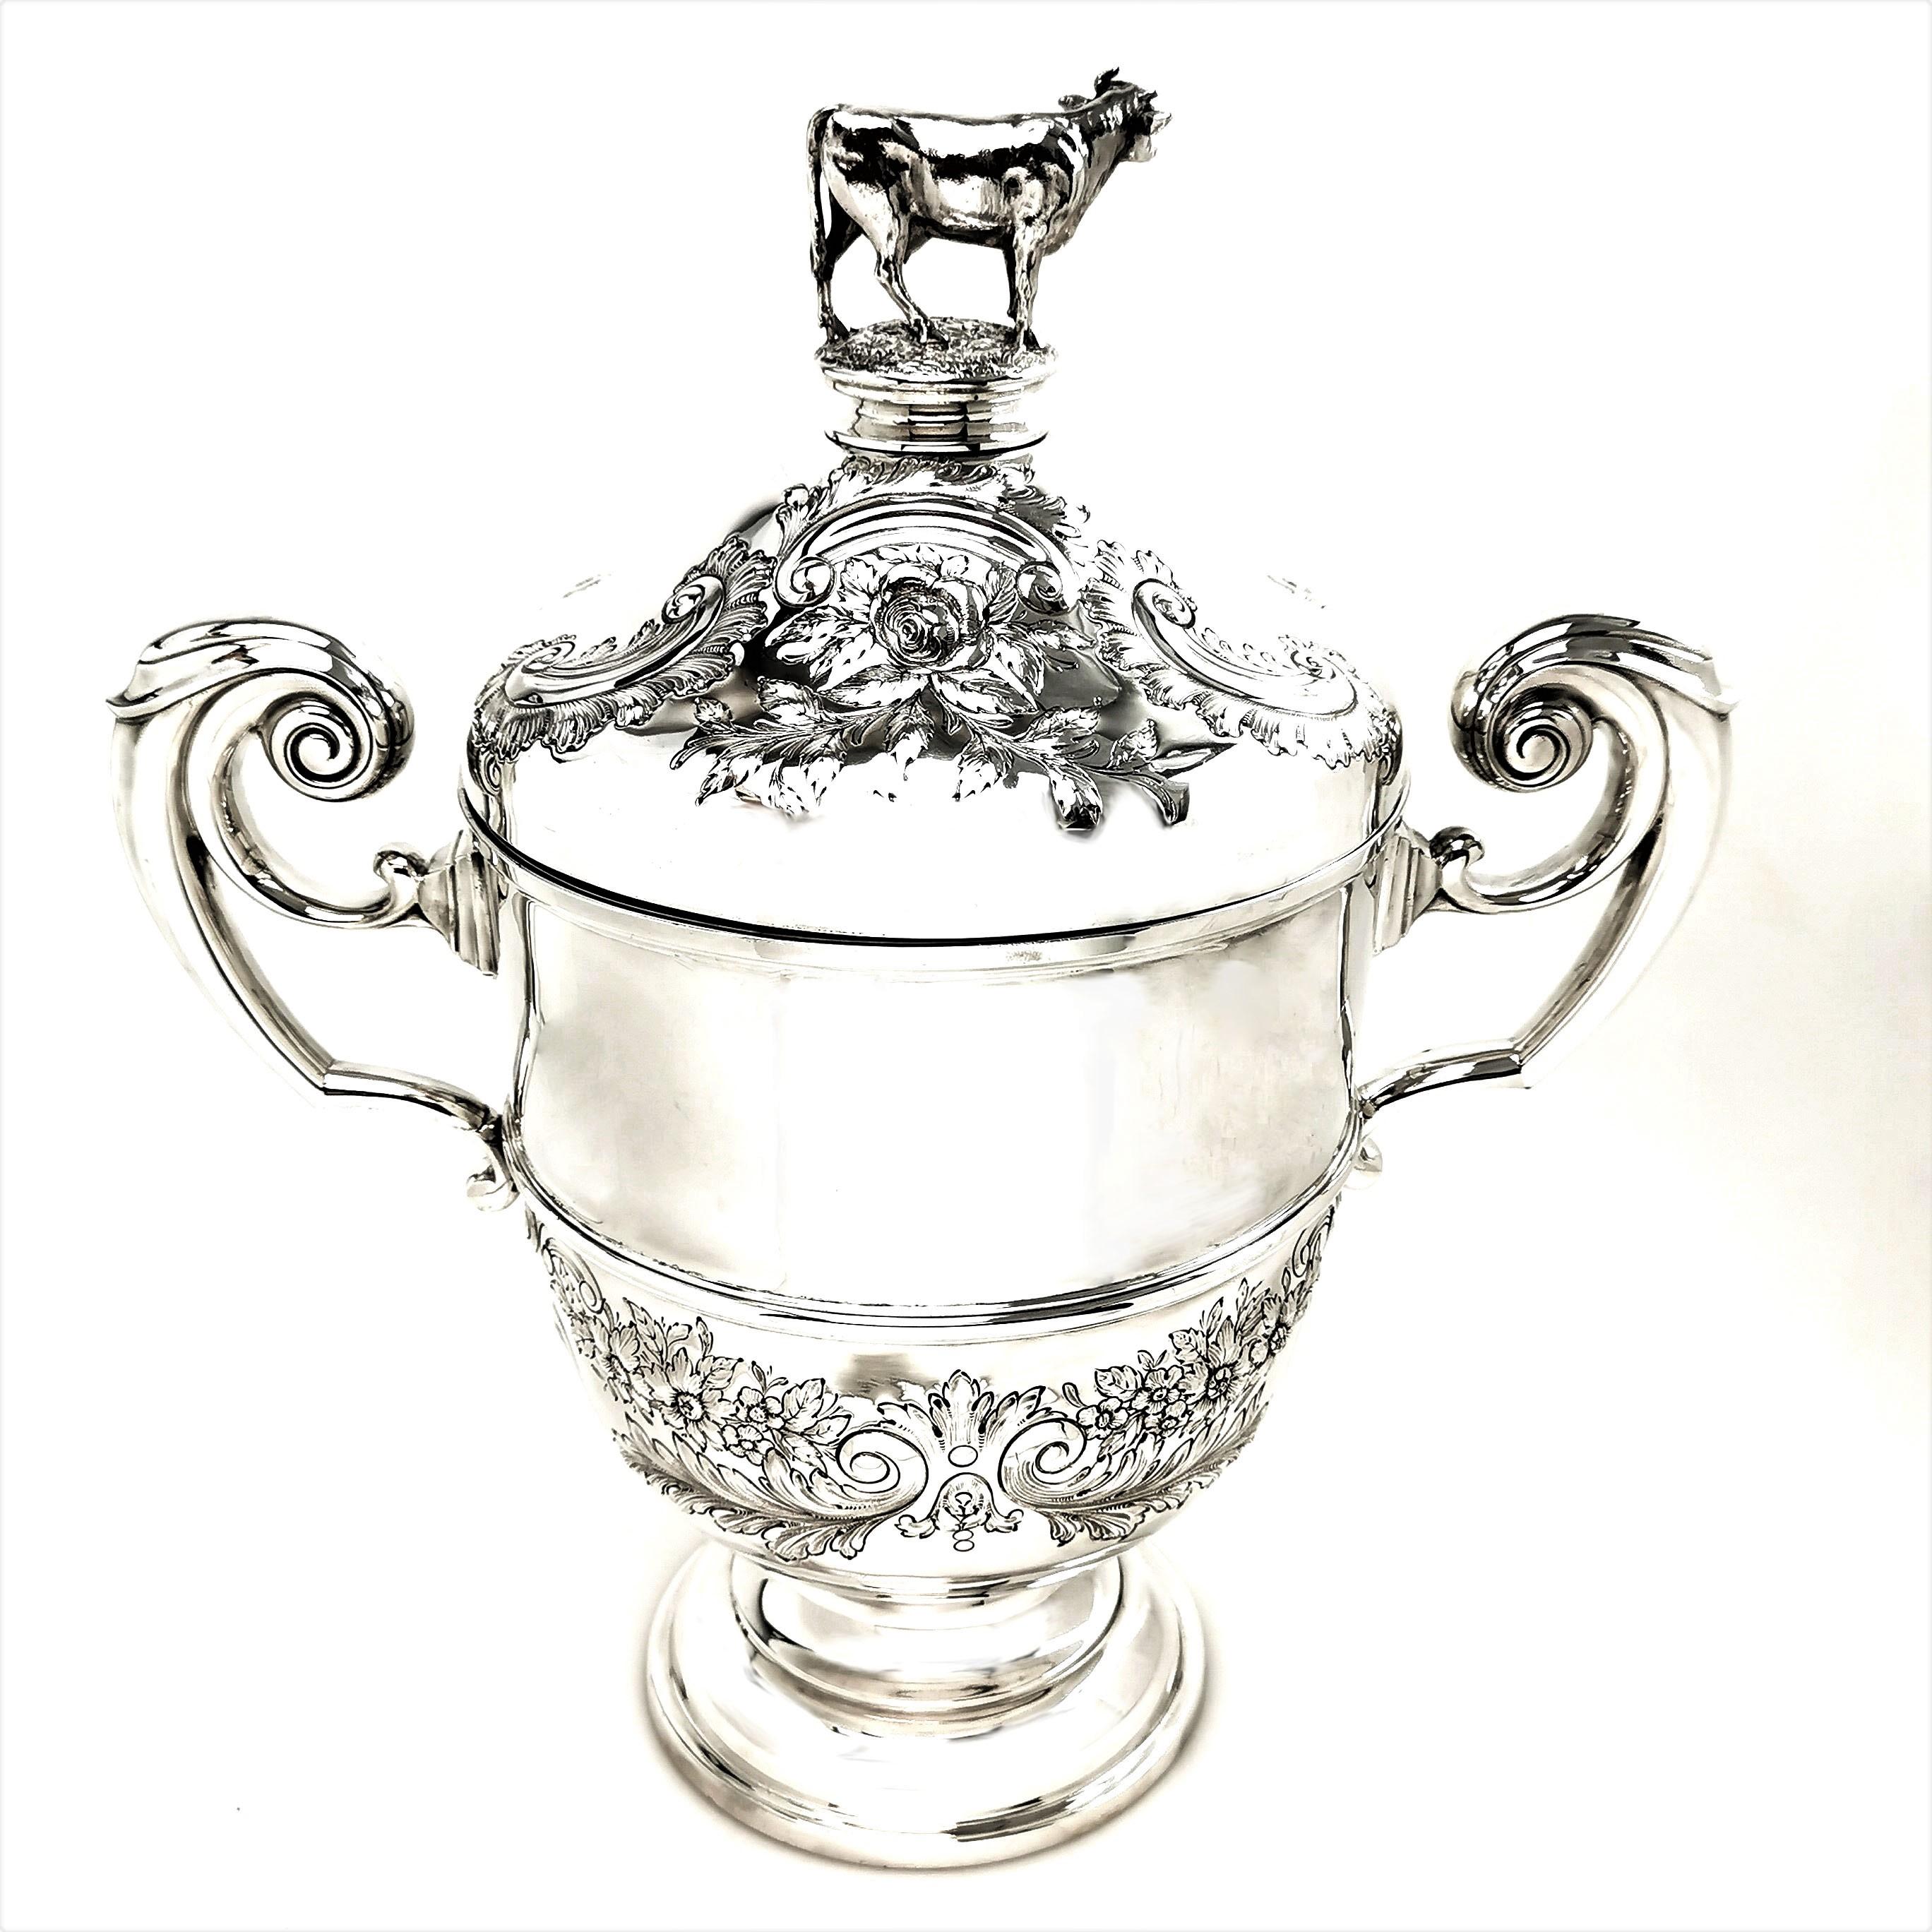 English Large Edwardian Antique Silver Trophy Lidded Cup & Cover 1903 Cow